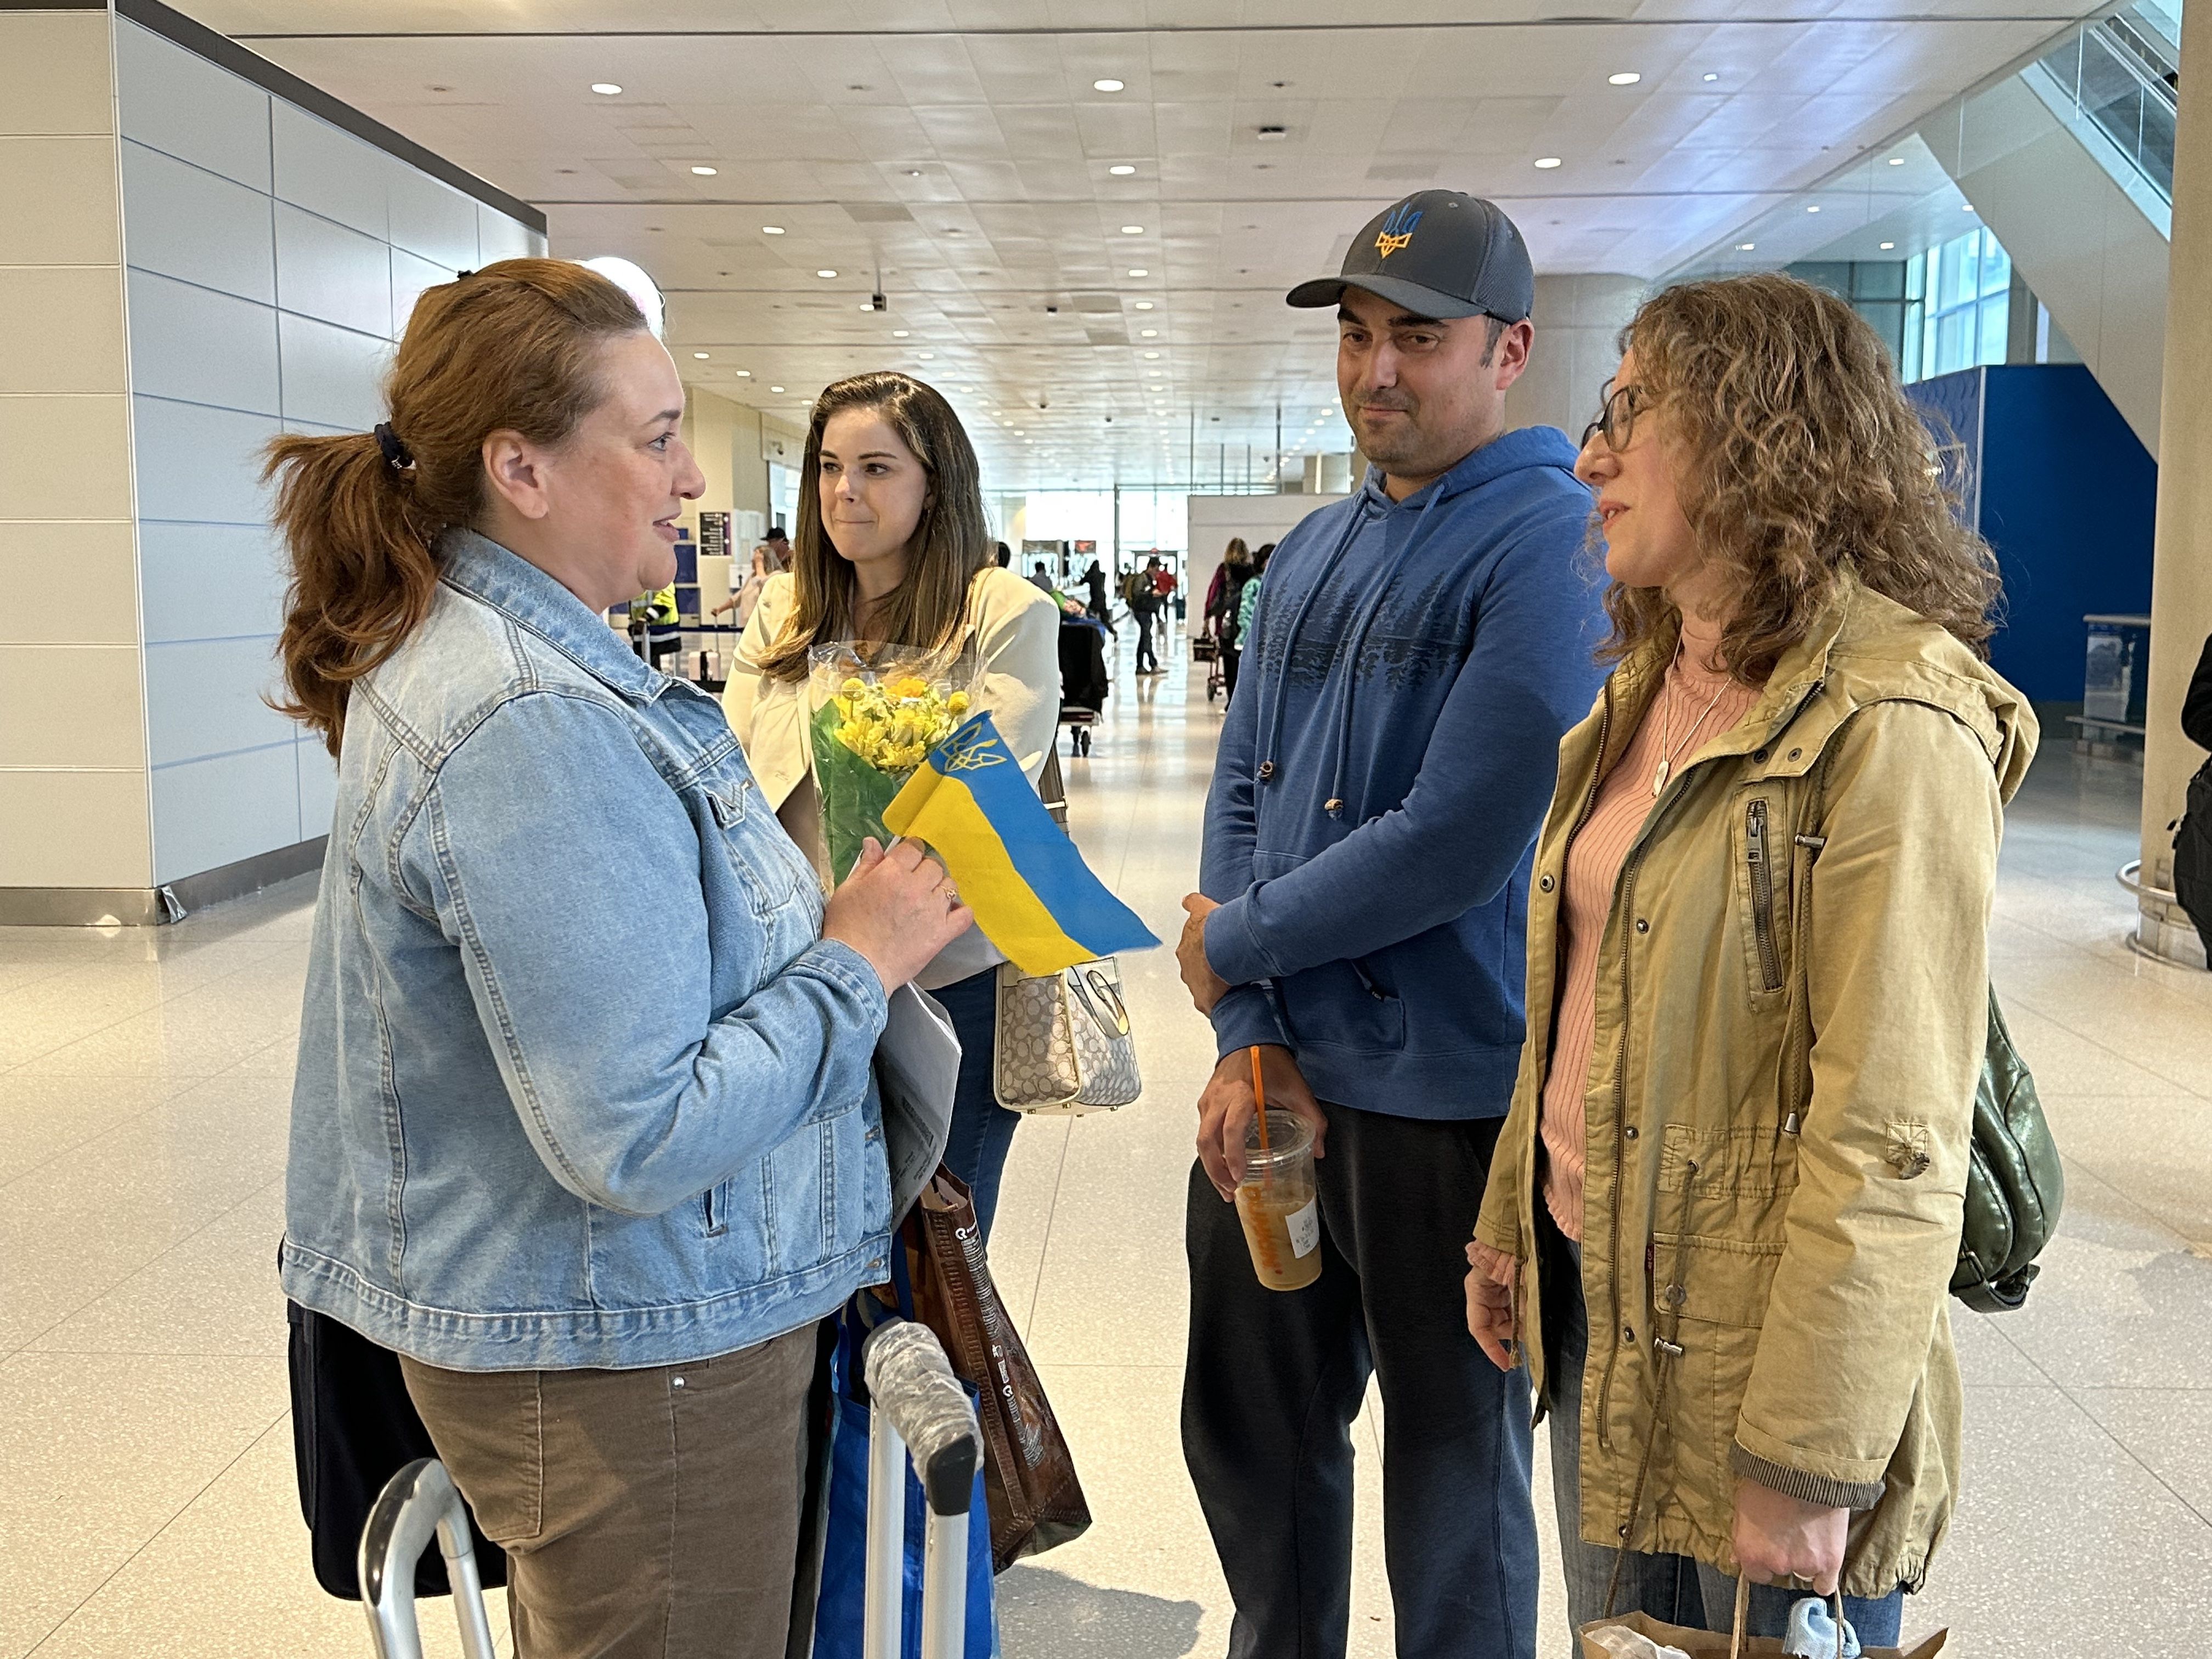 Alina Chernyakova, a Ukrainian refugee, speaks to two volunteers she met virtually before coming to Boston. The voluneers are members of Temple Beth Shalom in Needham, where Alina will work as a teacher.